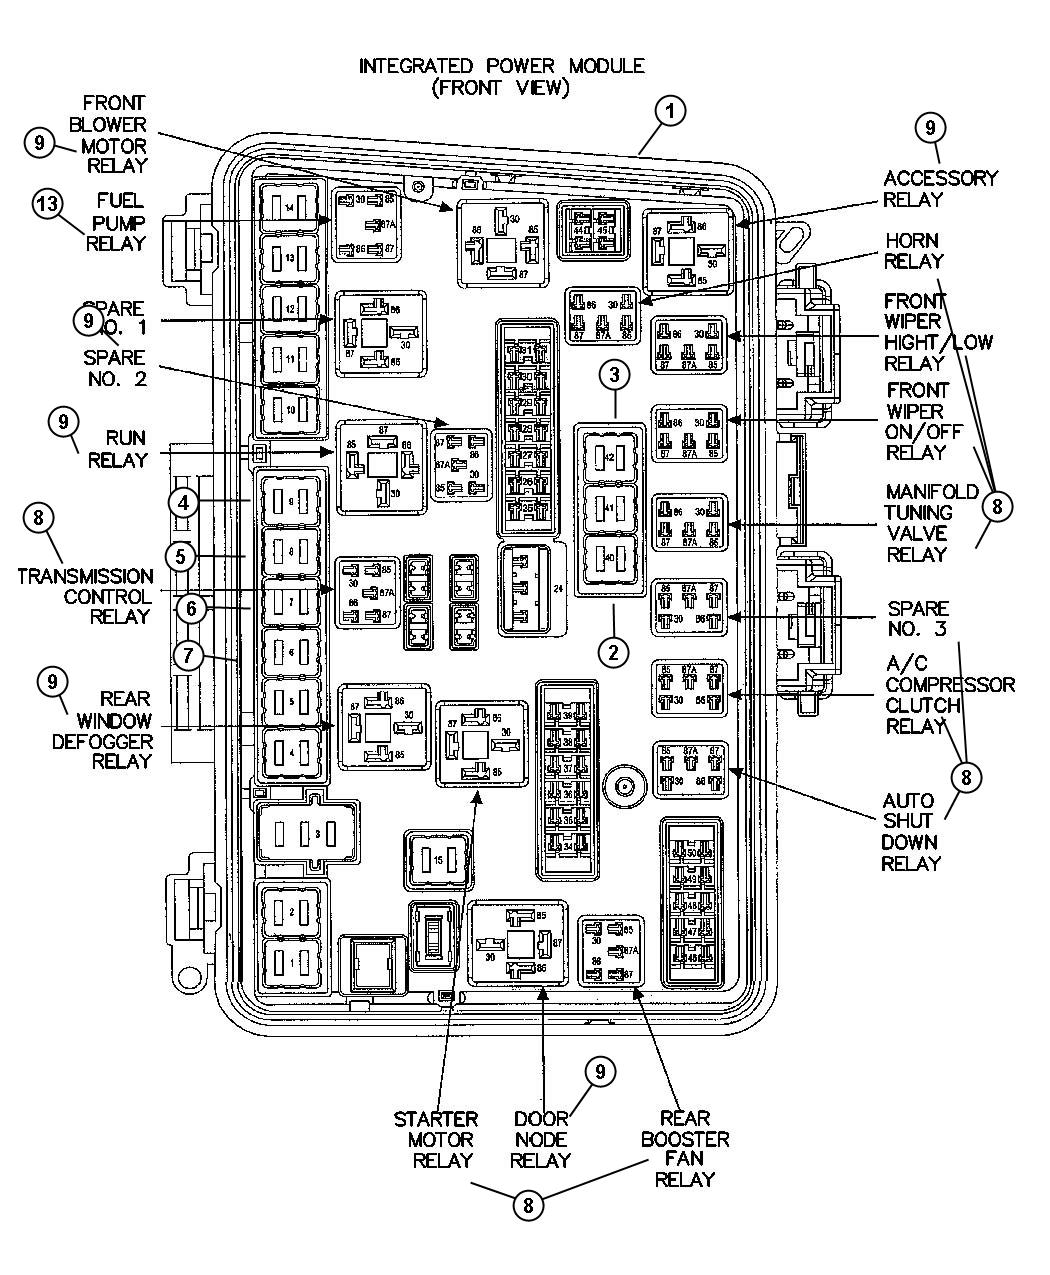 Diagram Power Distribution Center Relays and Fuses. for your 2015 Jeep Patriot   